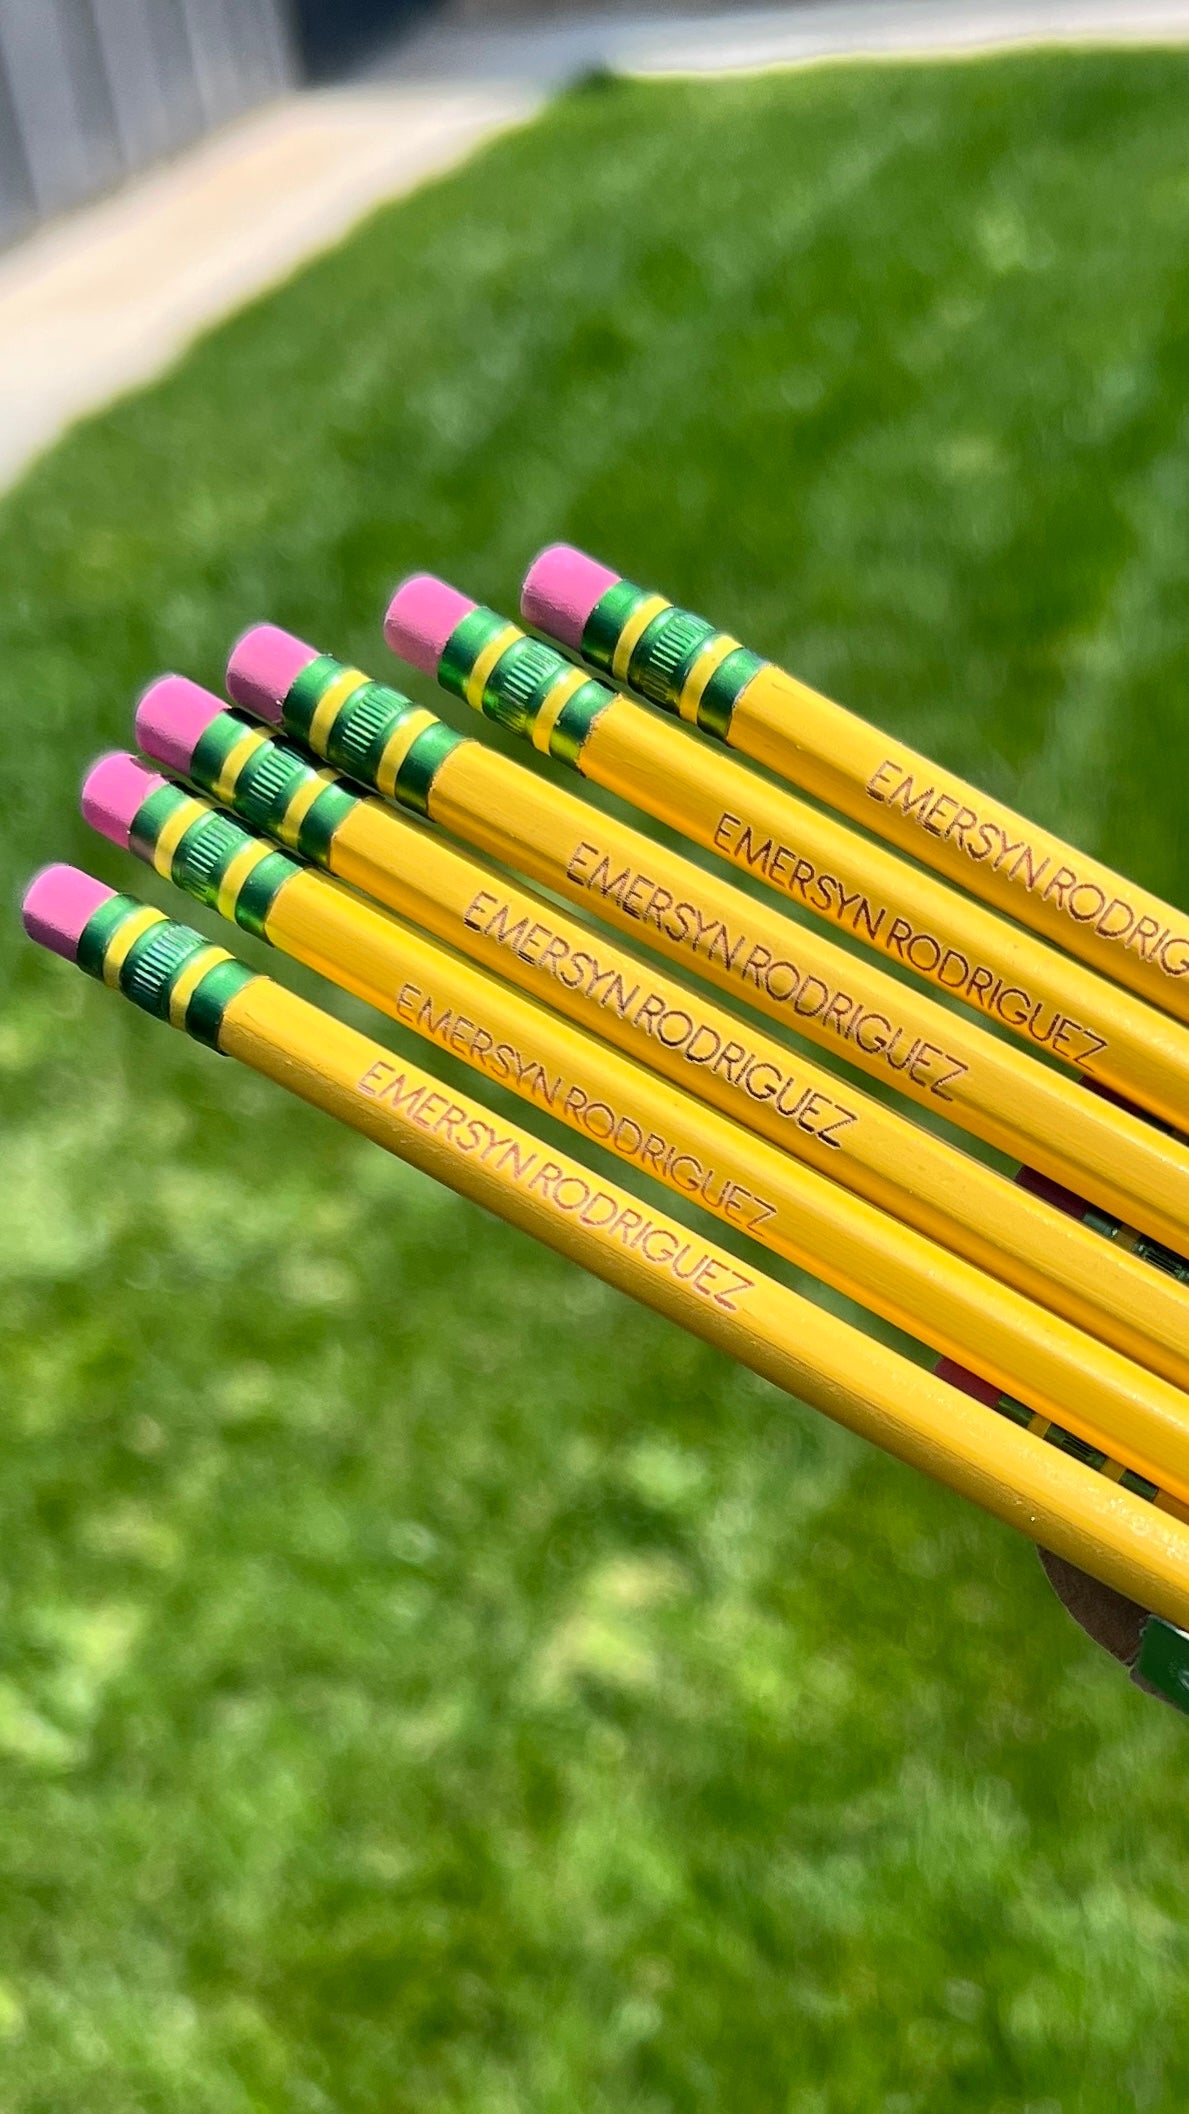 12 Pack - Personalized, Engraved Ticonderoga Pencils